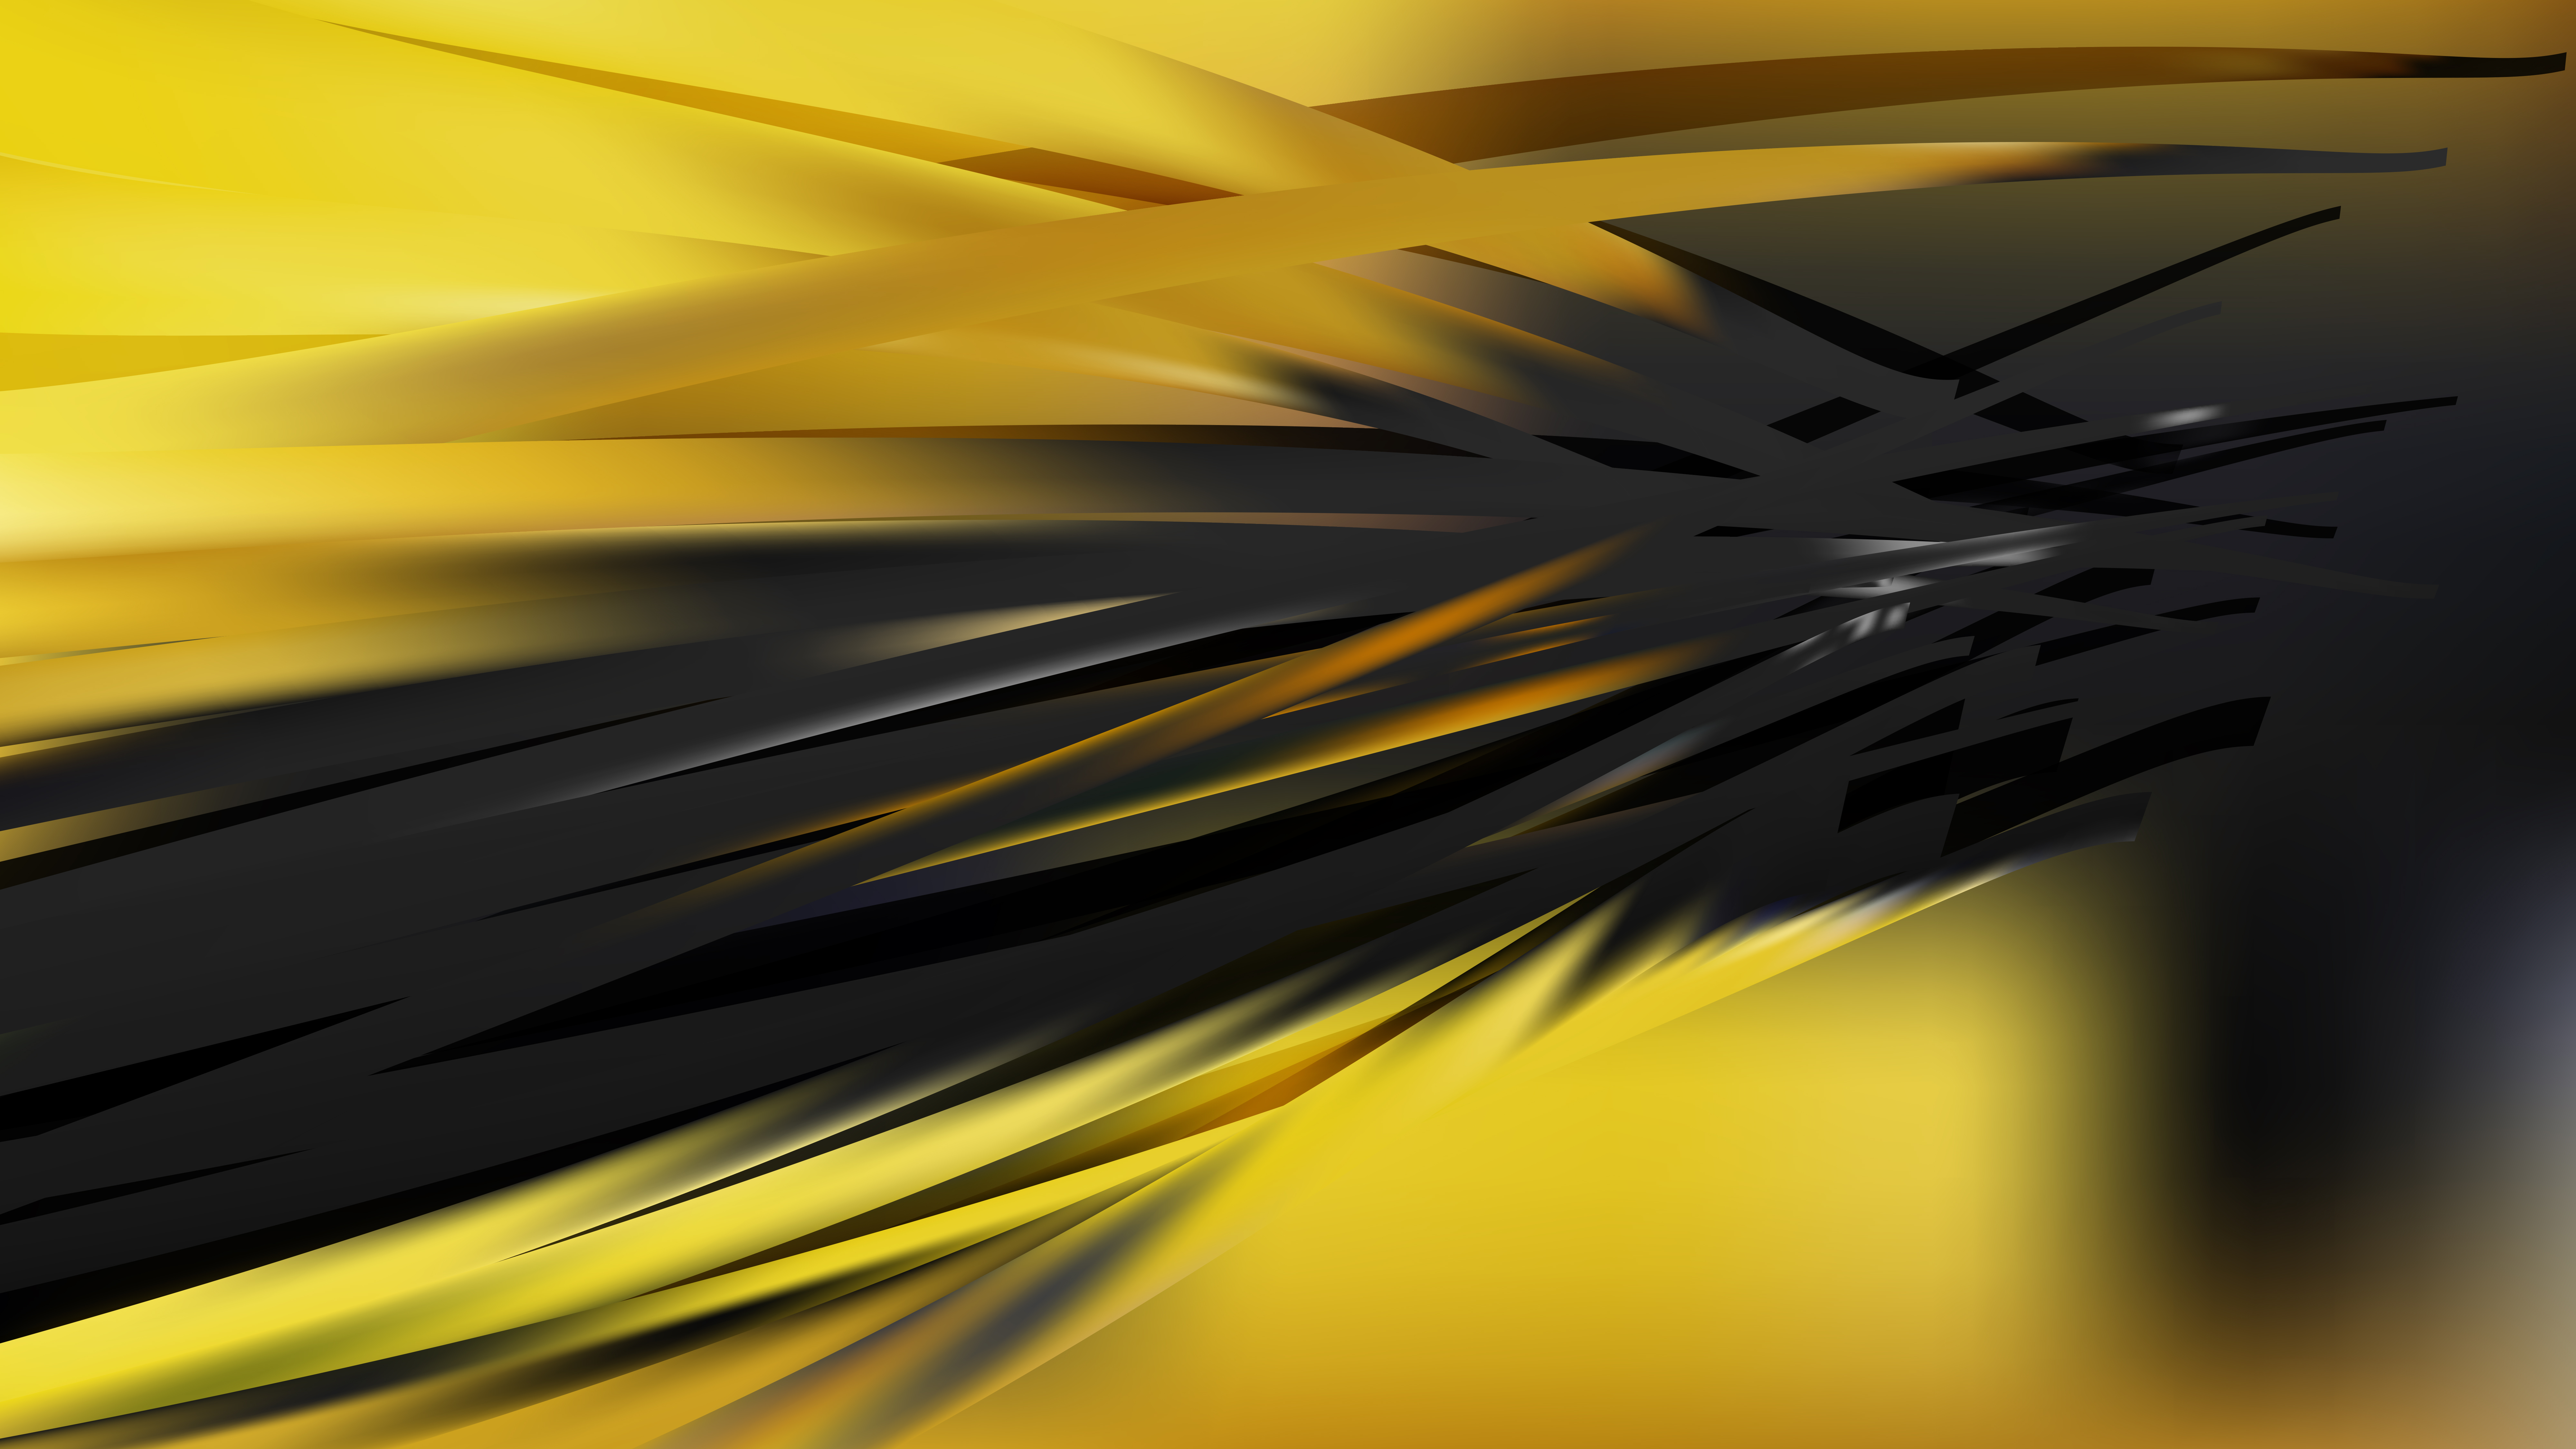 black and yellow background